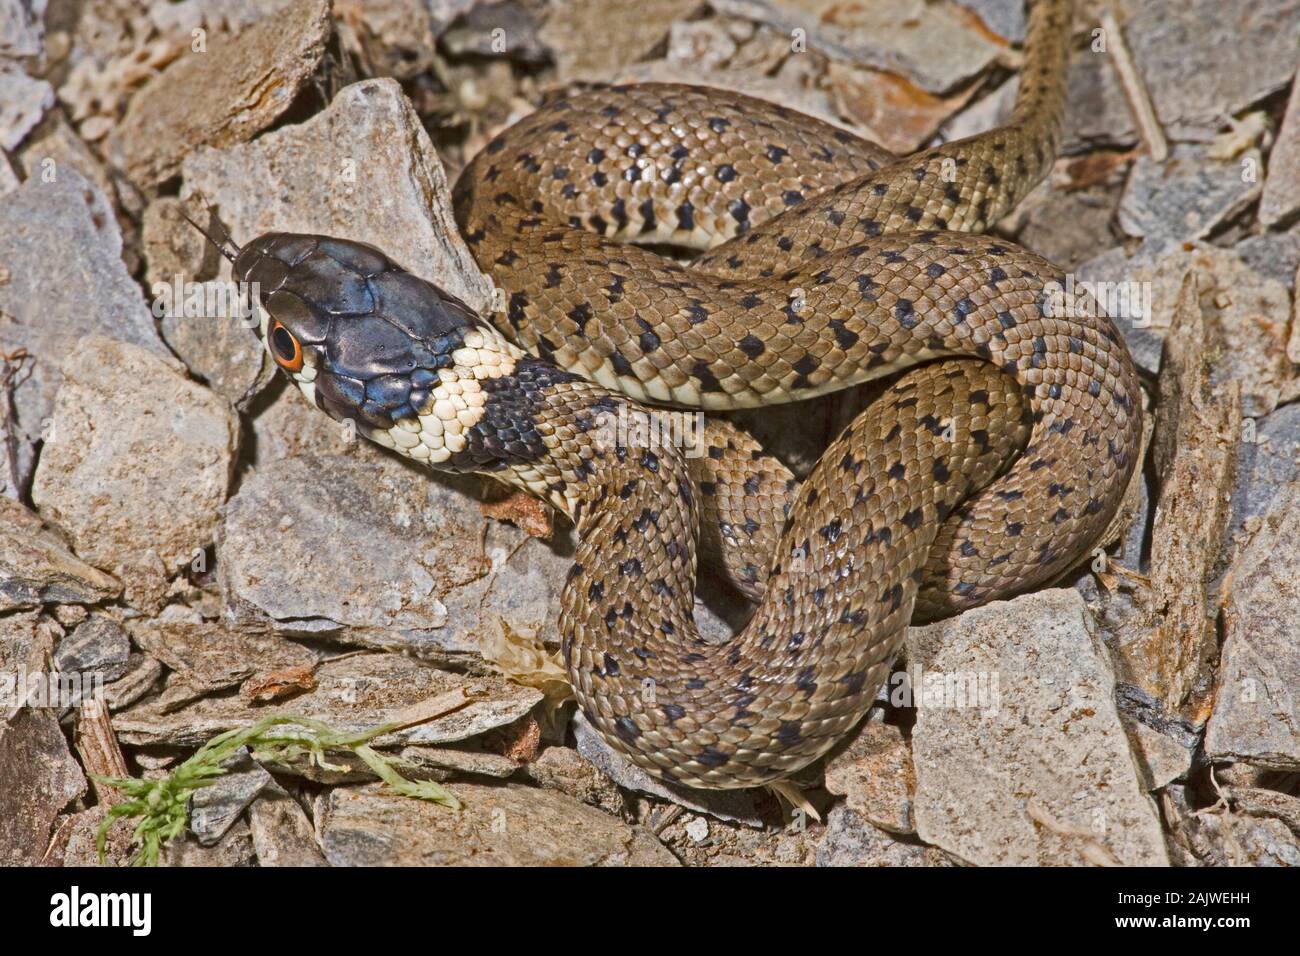 SPANISH GRASS SNAKE Natrix natrix astreptophora First year young animal, Asturias, north Spain. Iridescent head scales indicative of recent sloughing. Stock Photo